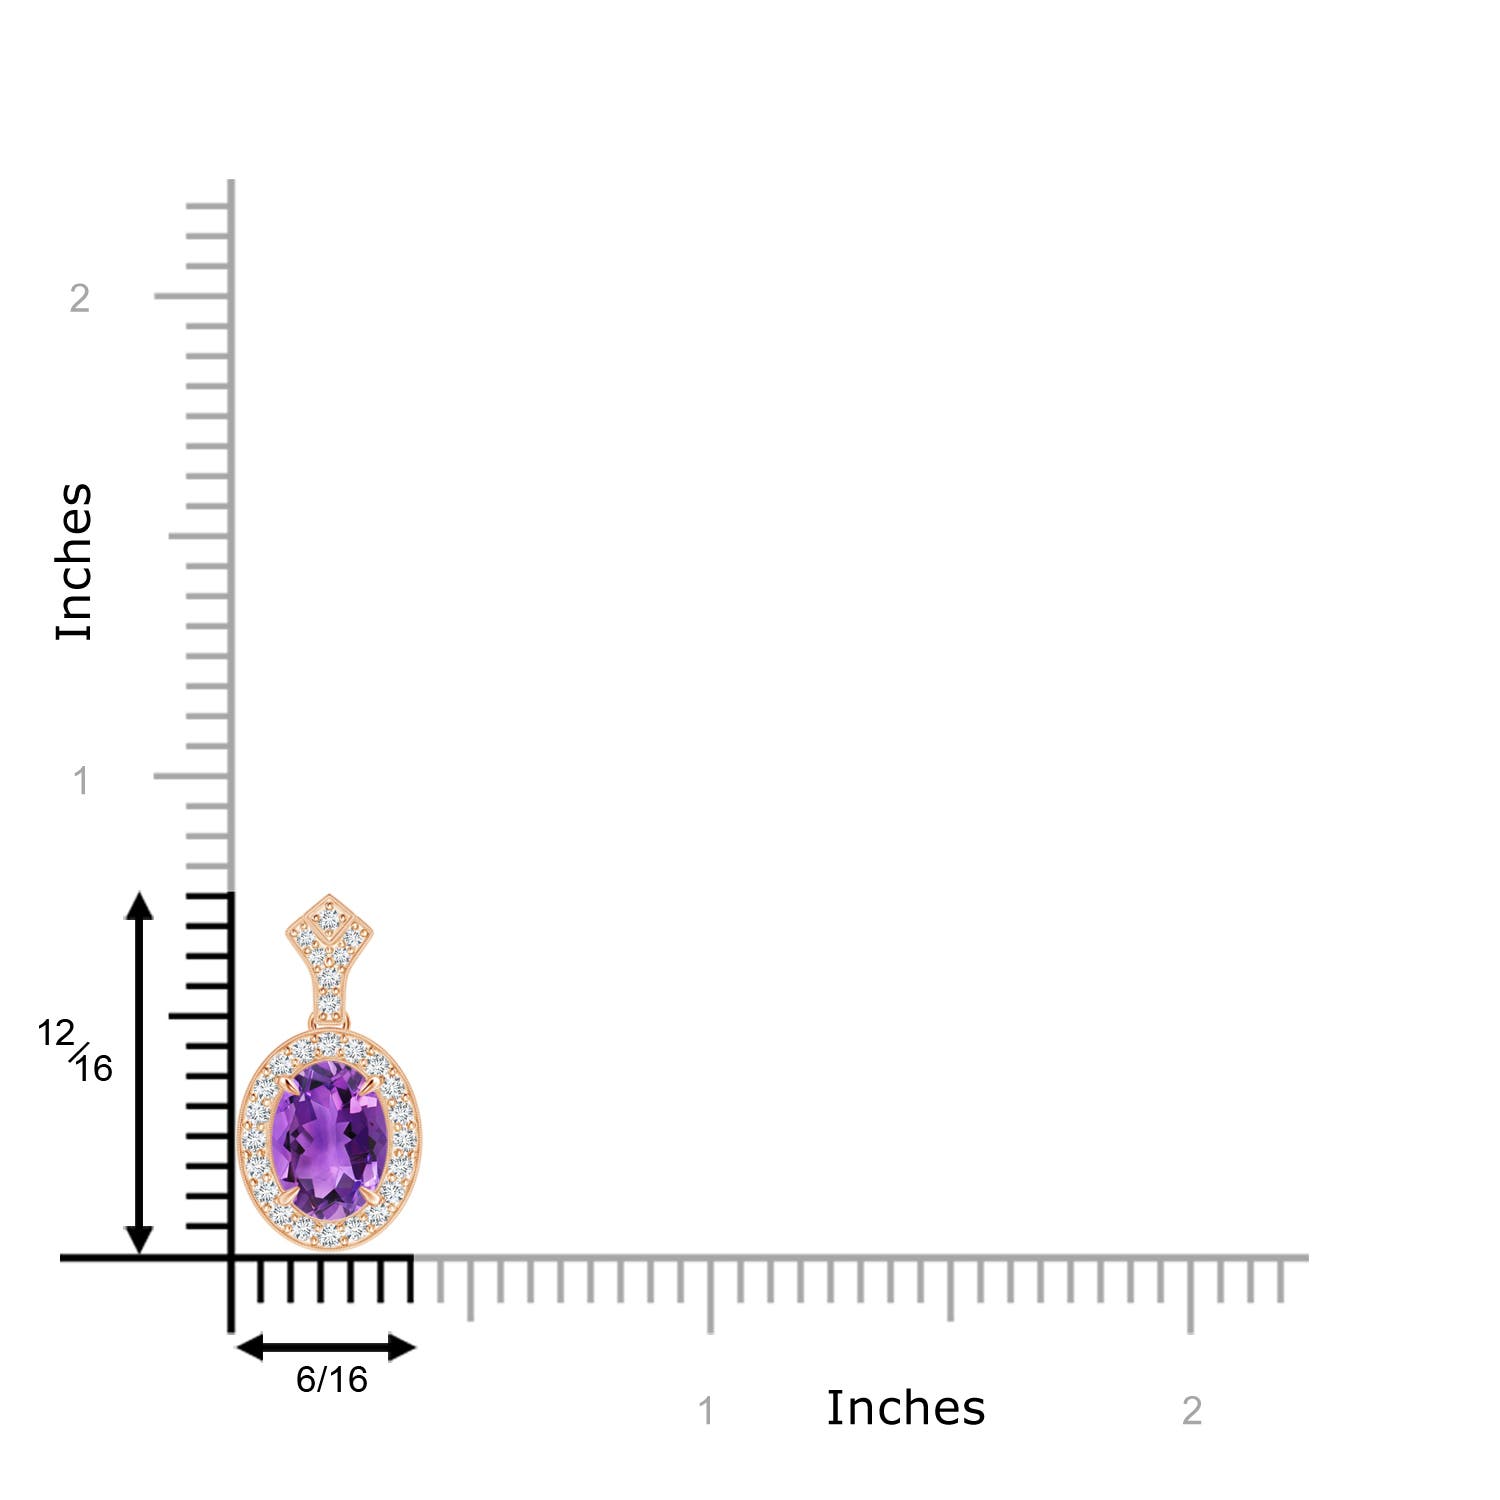 AAA - Amethyst / 1.79 CT / 14 KT Rose Gold